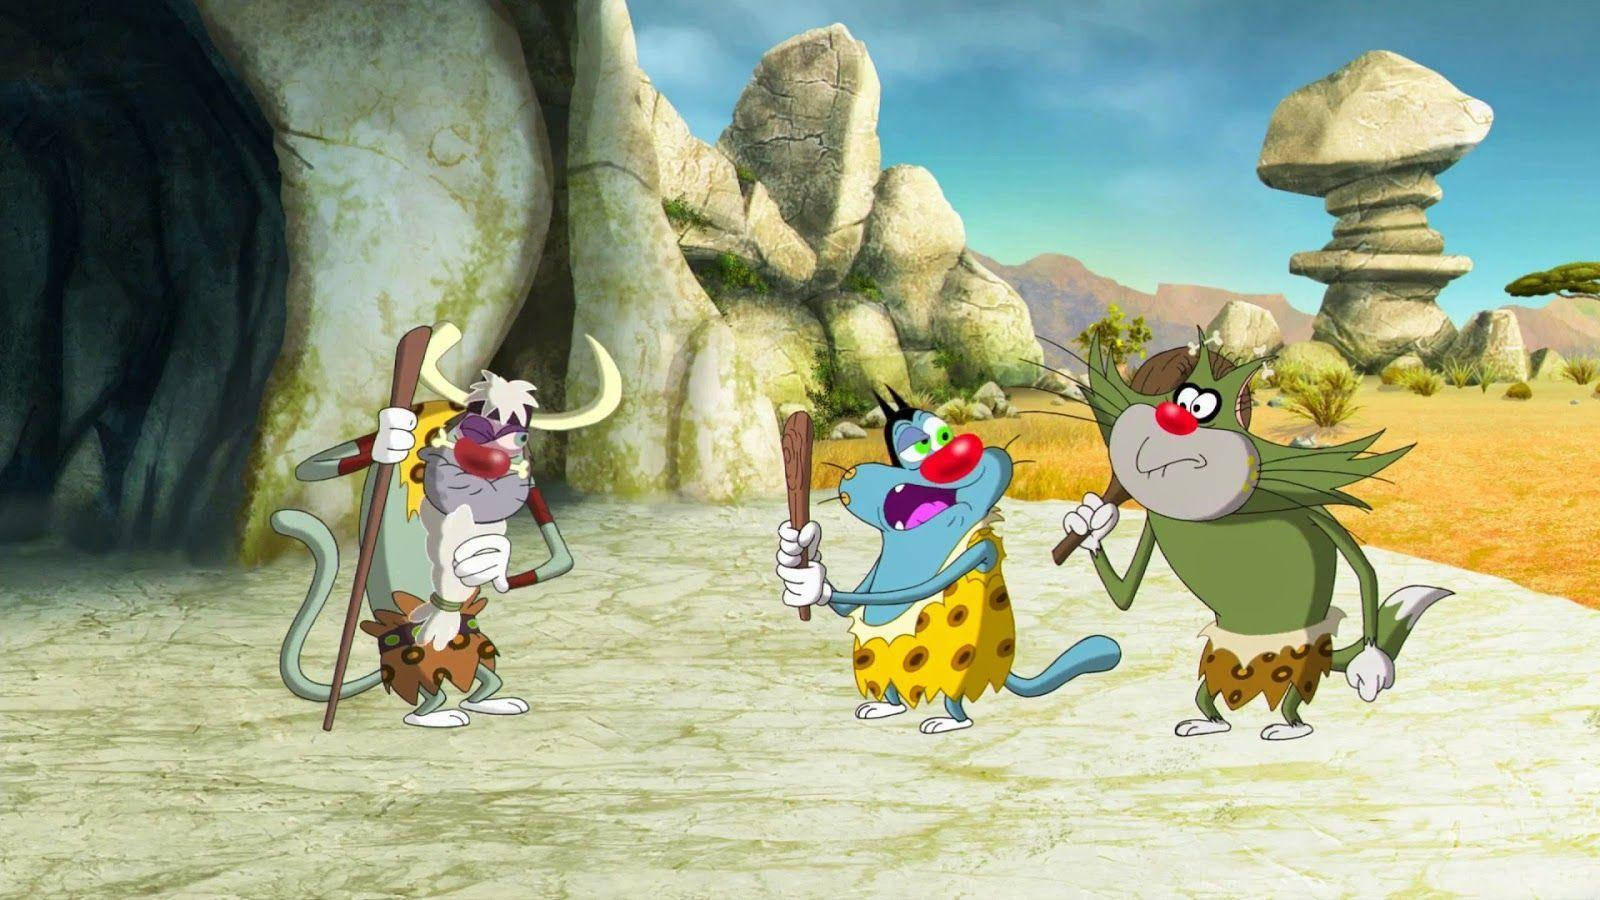 Download Oggy And The Cockroaches Cavemen Wallpaper 